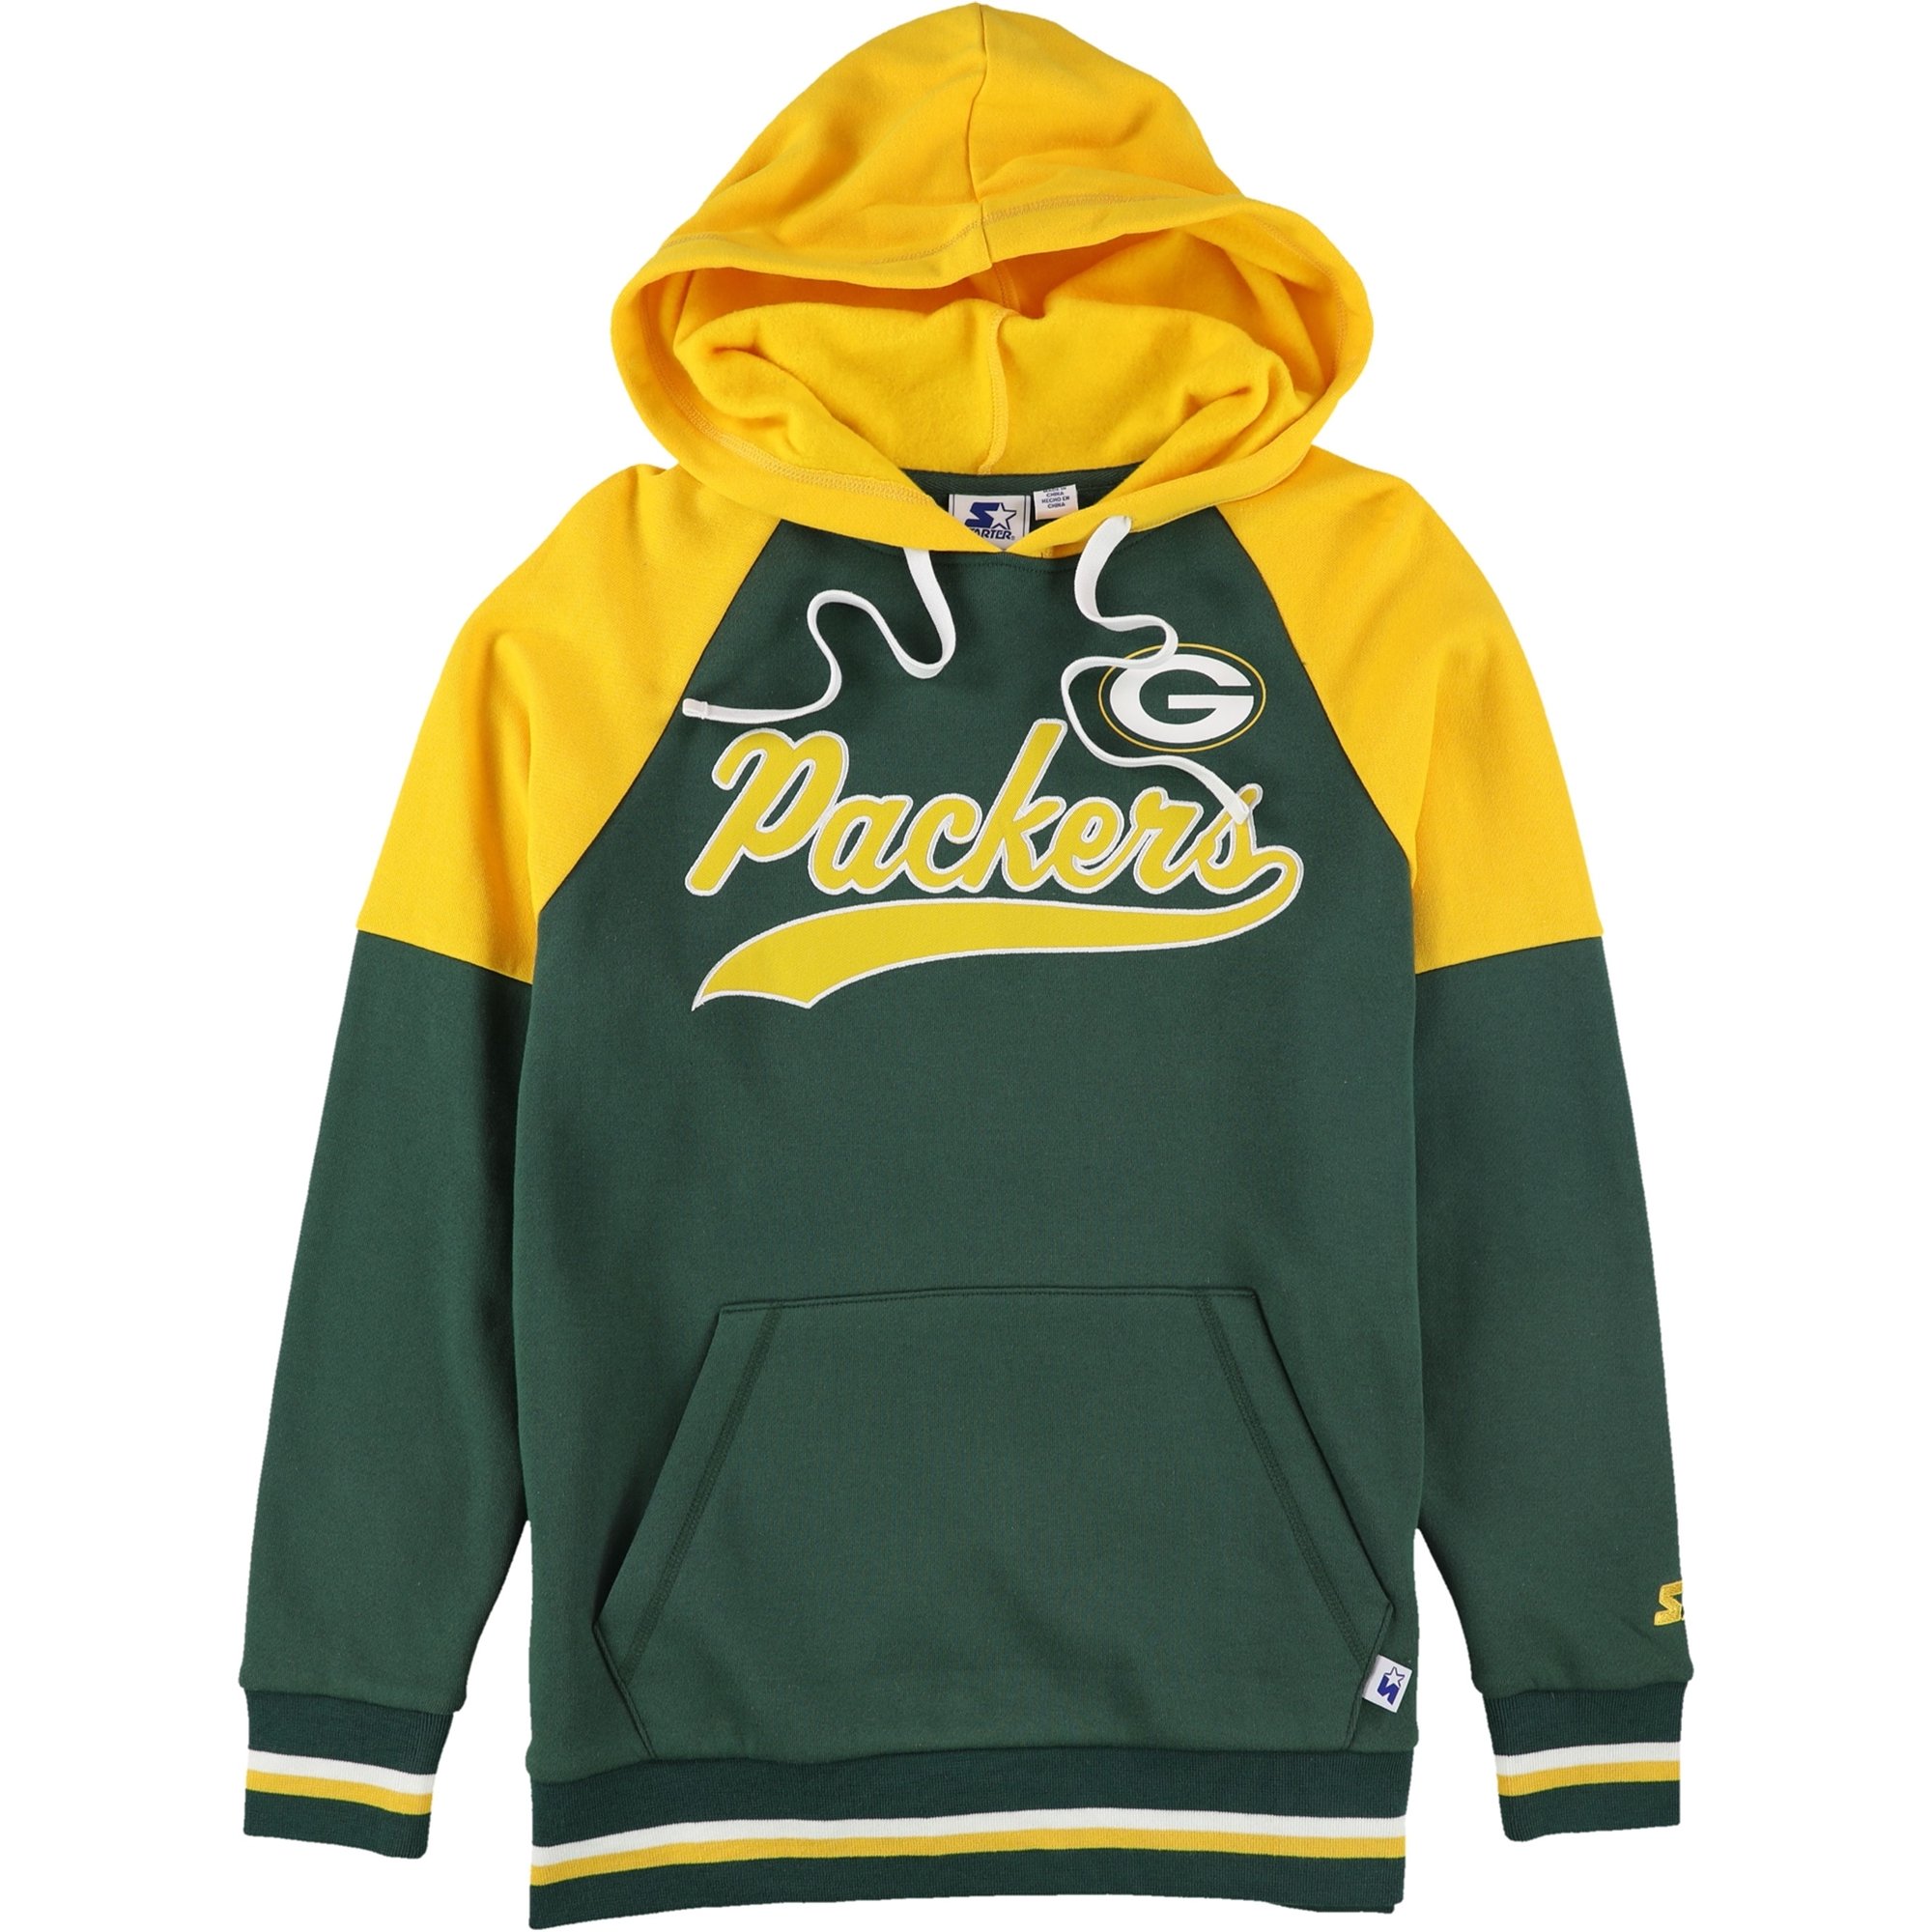 packers sweater